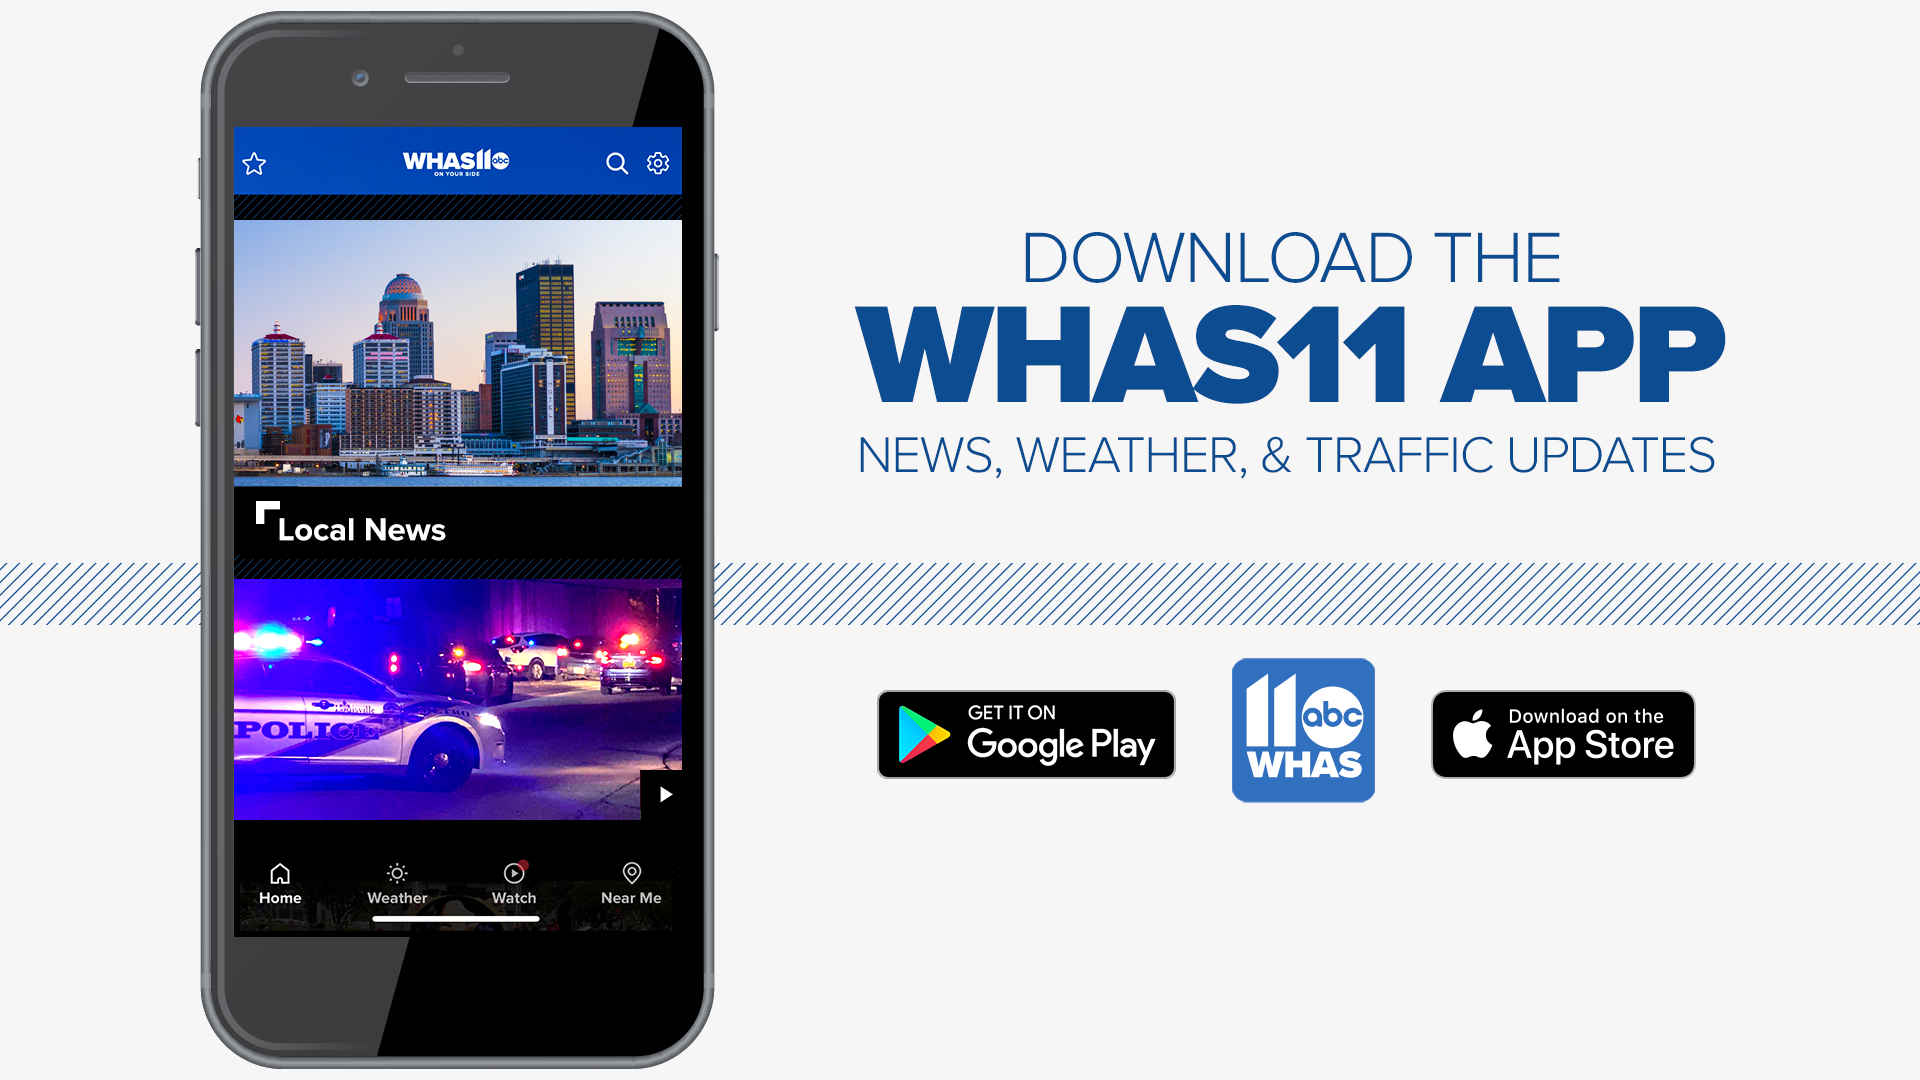 The WHAS11 app has a modernized look that complements what you see during broadcasts and online. We’ve made it easier to find information you care about most.